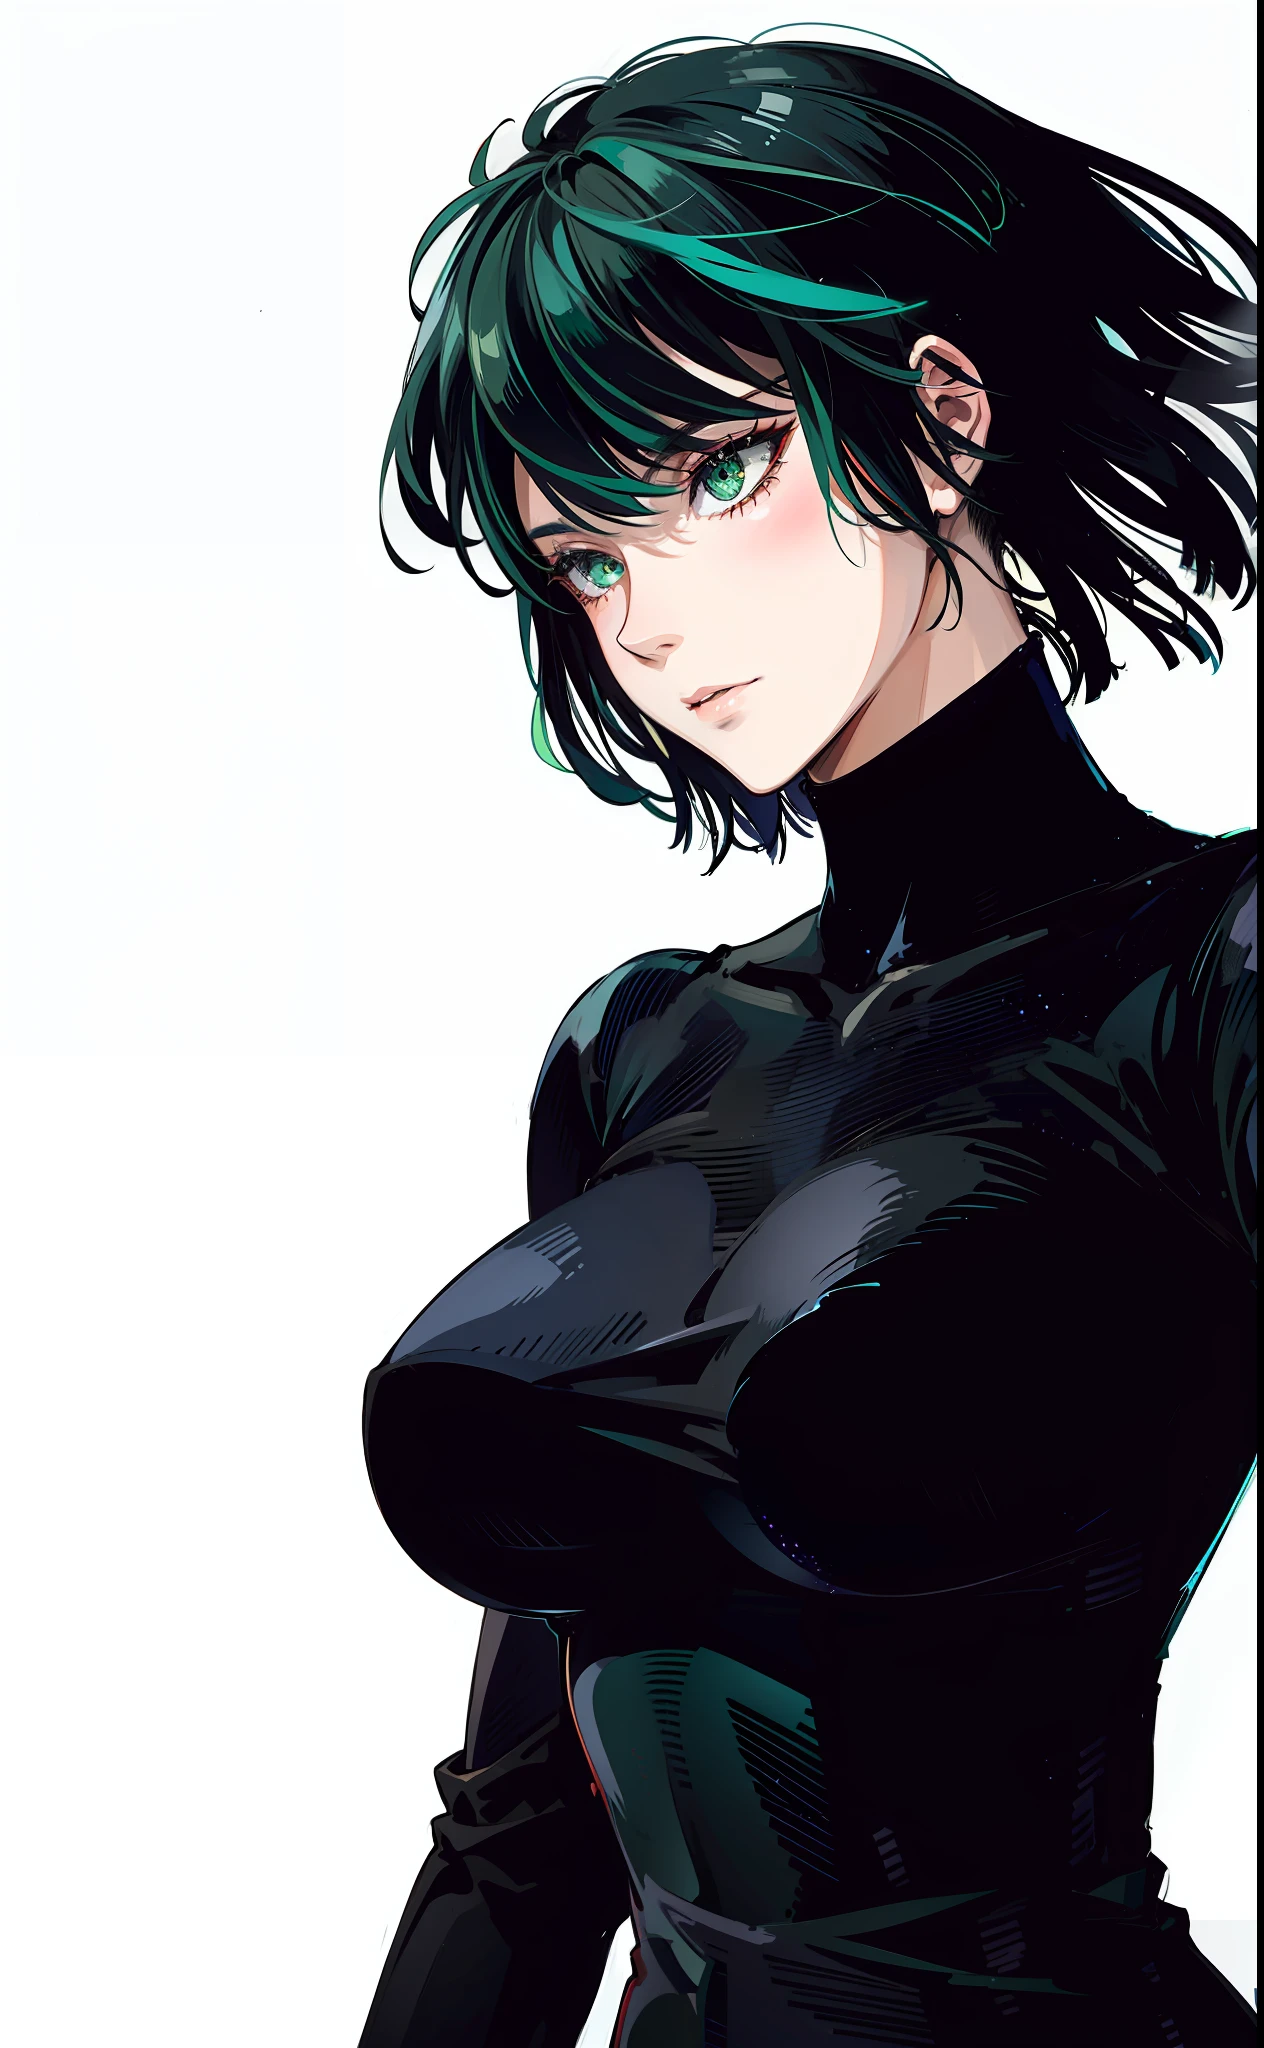 A close-up of a person wearing a black shirt and green hair, Tatsumaki from One Punch Man, Fubuki, Æon Flux style mix, by Kentaro Miura, the style is a mix of Æon flux, Anime girl in a black dress, Art by Kentaro Miura, Portrait of a female anime heroine, Female anime character,  Anime woman, fubuki, green hair, short hair